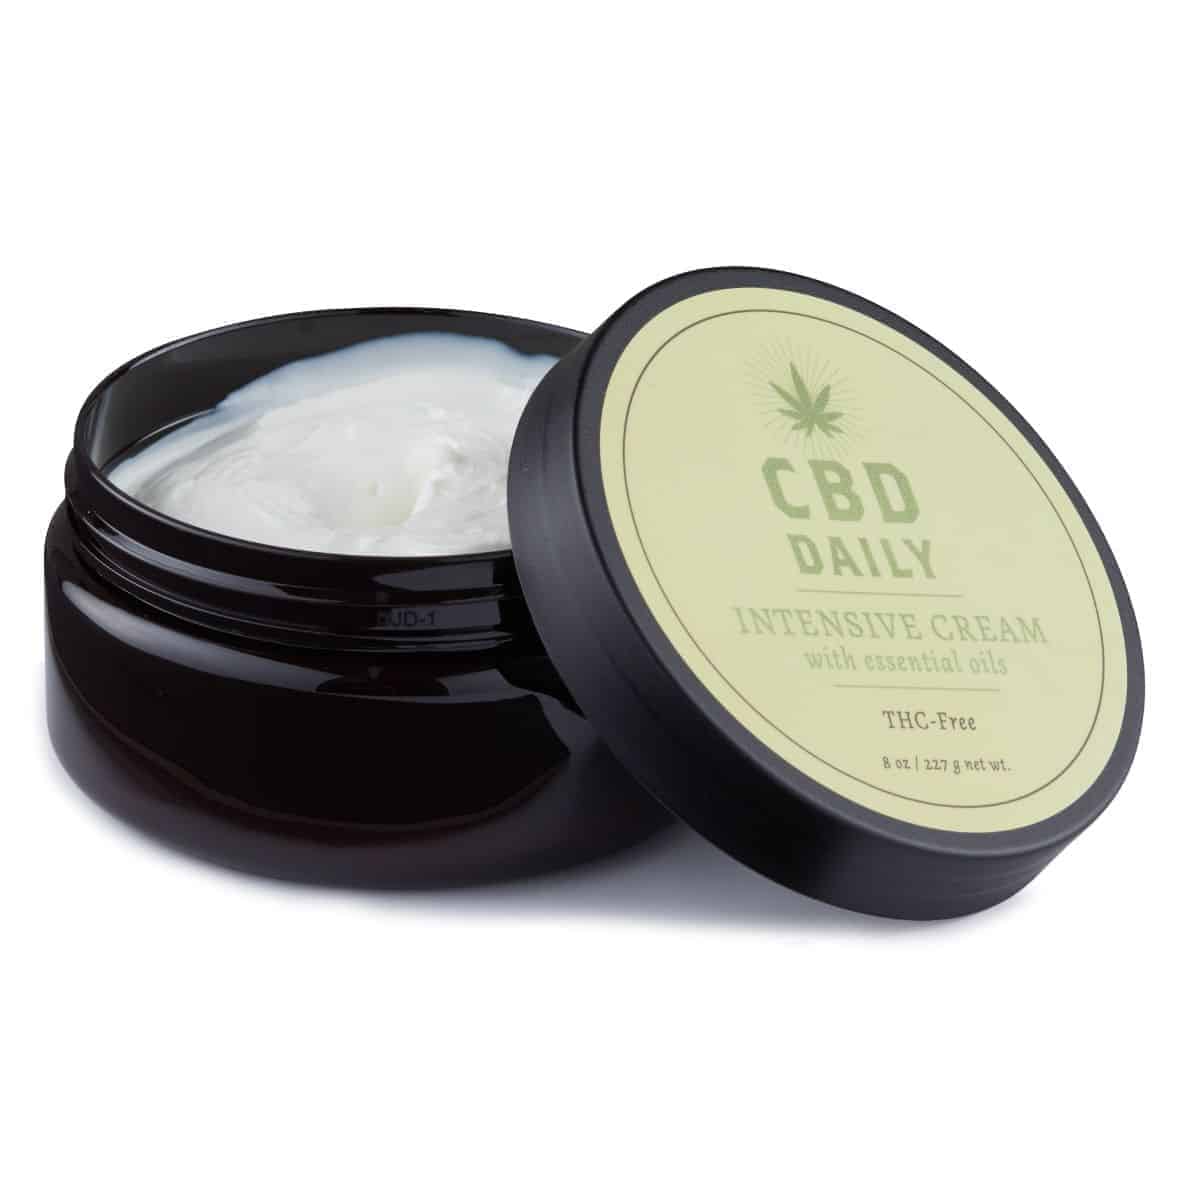 Intensive Cream Mint Scent 1.7 oz | Shop Earthly Body